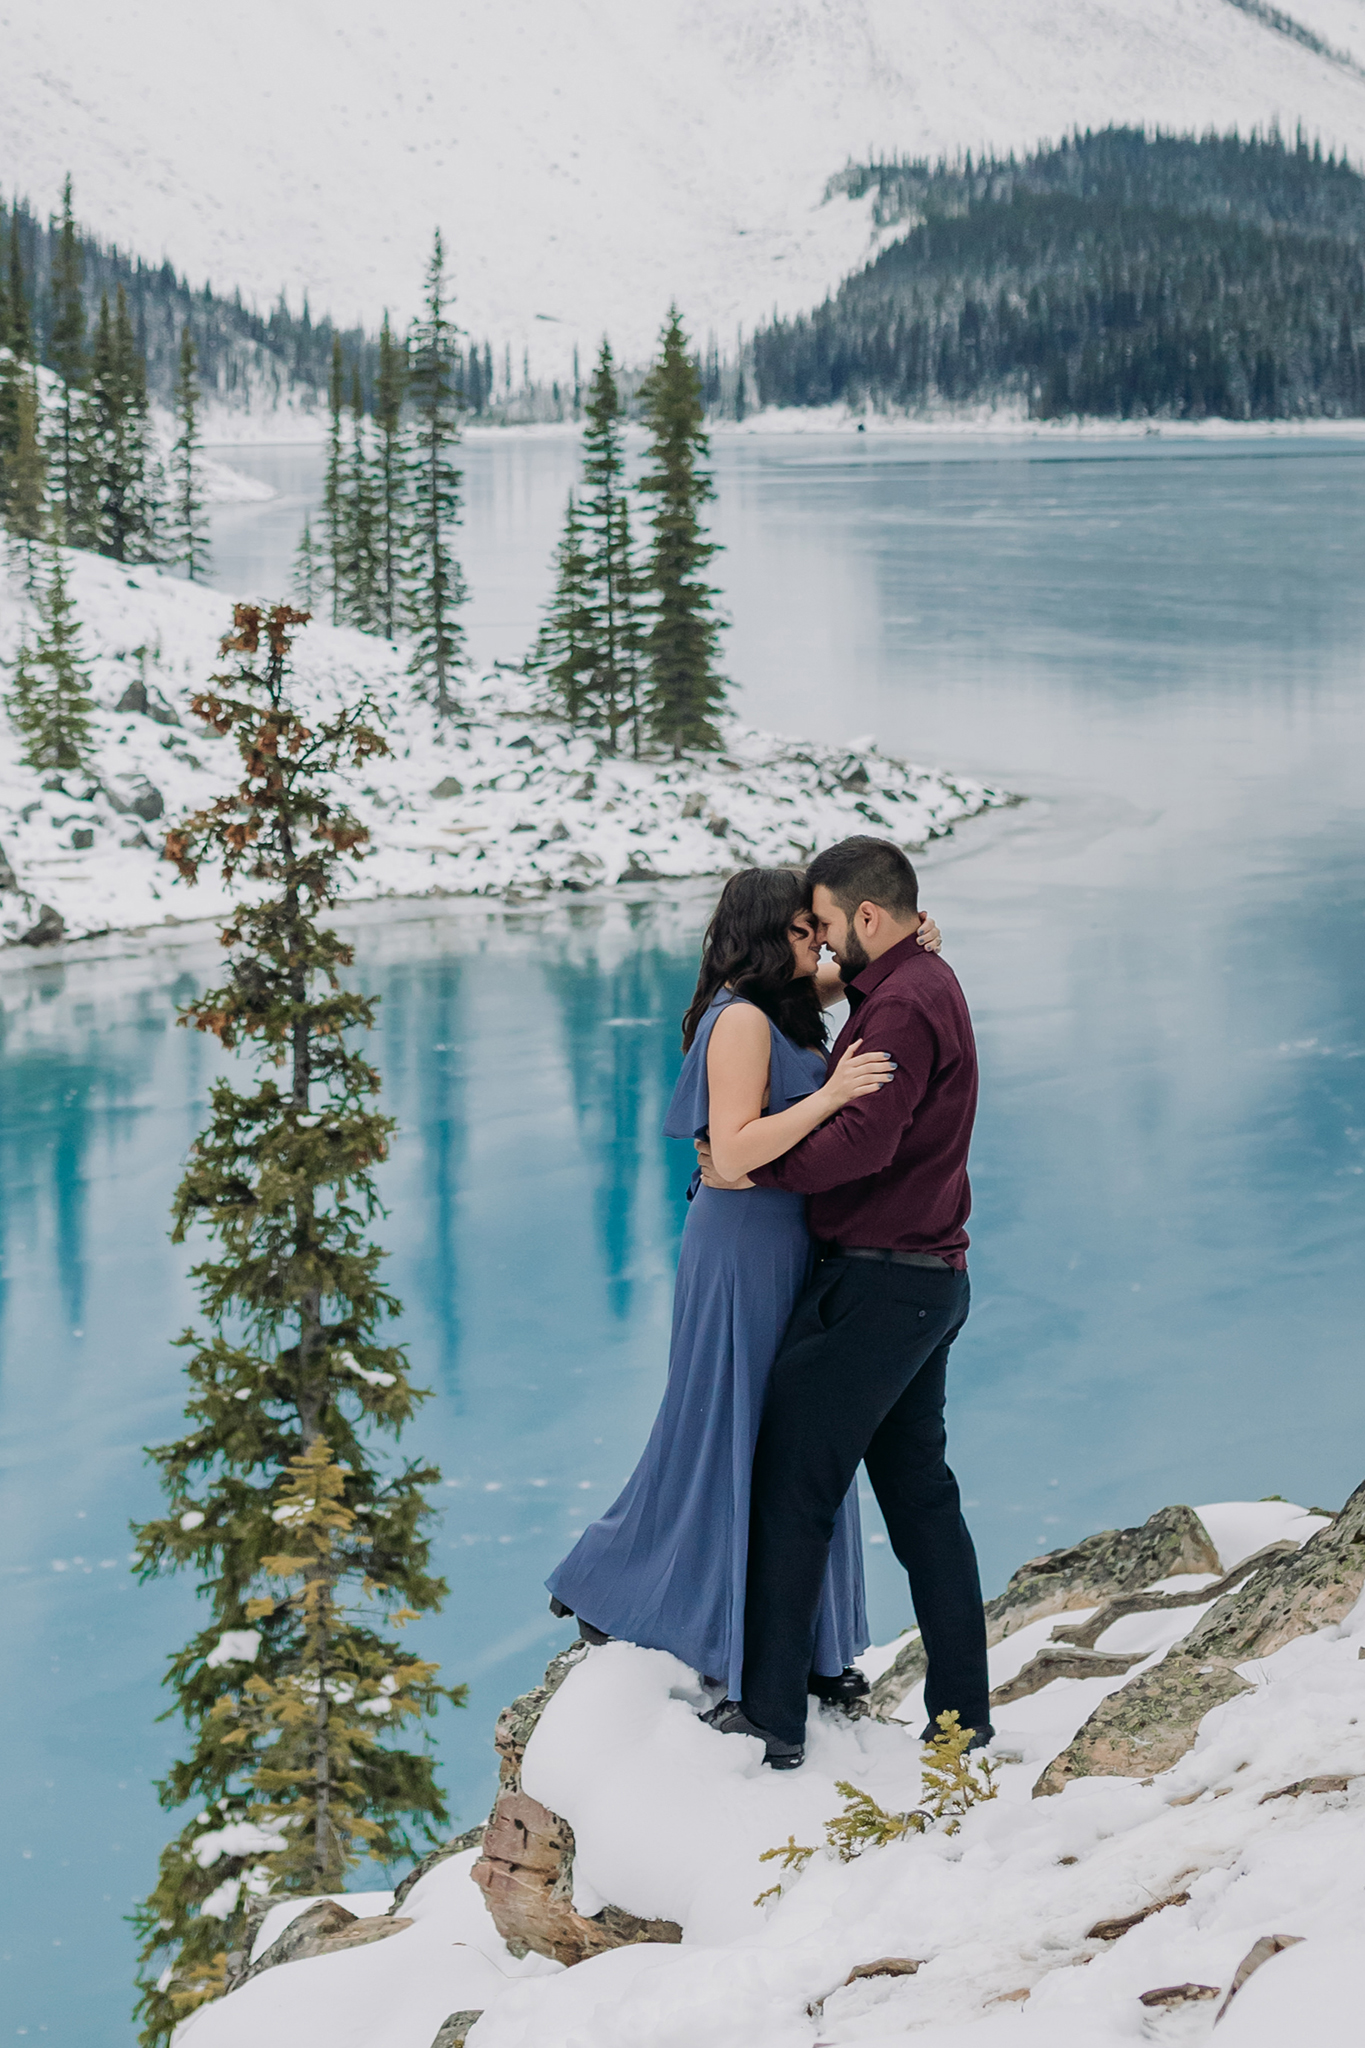 Moraine Lake in October: Freshly frozen mountain lake with blue ice makes stunning backdrop for engagement photos